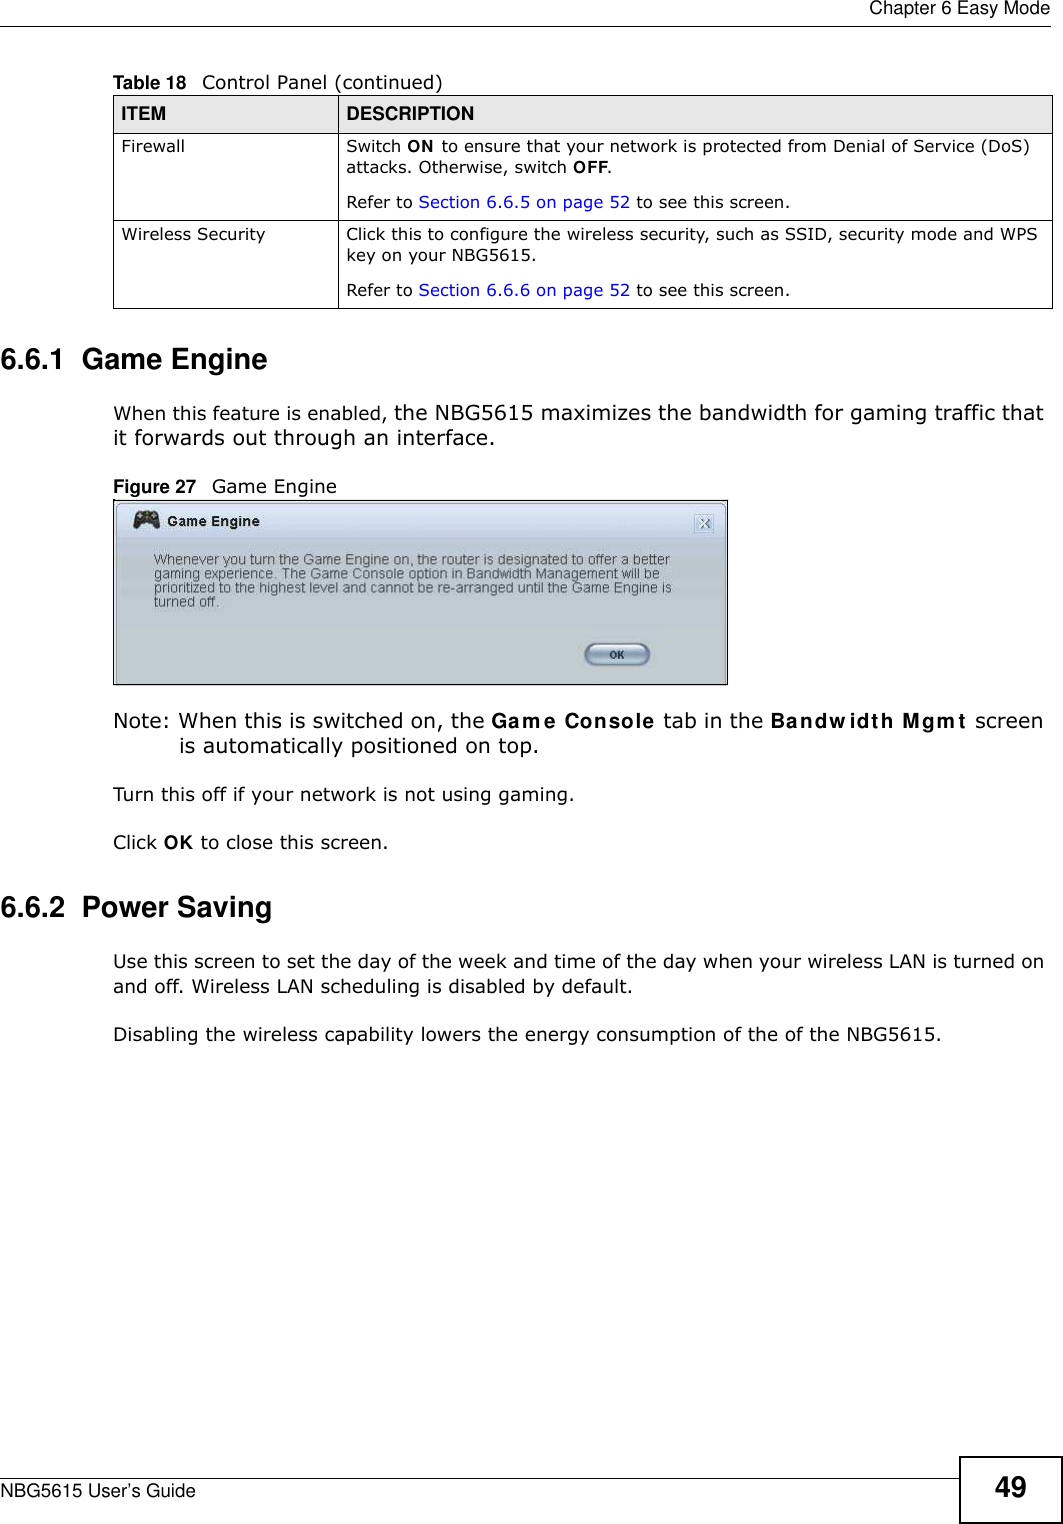  Chapter 6 Easy ModeNBG5615 User’s Guide 496.6.1  Game EngineWhen this feature is enabled, the NBG5615 maximizes the bandwidth for gaming traffic that it forwards out through an interface.Figure 27   Game EngineNote: When this is switched on, the Gam e Console tab in the Bandw idth Mgm t screen is automatically positioned on top. Turn this off if your network is not using gaming.Click OK to close this screen.6.6.2  Power SavingUse this screen to set the day of the week and time of the day when your wireless LAN is turned on and off. Wireless LAN scheduling is disabled by default. Disabling the wireless capability lowers the energy consumption of the of the NBG5615. Firewall Switch ON to ensure that your network is protected from Denial of Service (DoS) attacks. Otherwise, switch OFF.Refer to Section 6.6.5 on page 52 to see this screen.Wireless Security Click this to configure the wireless security, such as SSID, security mode and WPS key on your NBG5615. Refer to Section 6.6.6 on page 52 to see this screen.Table 18   Control Panel (continued)ITEM DESCRIPTION